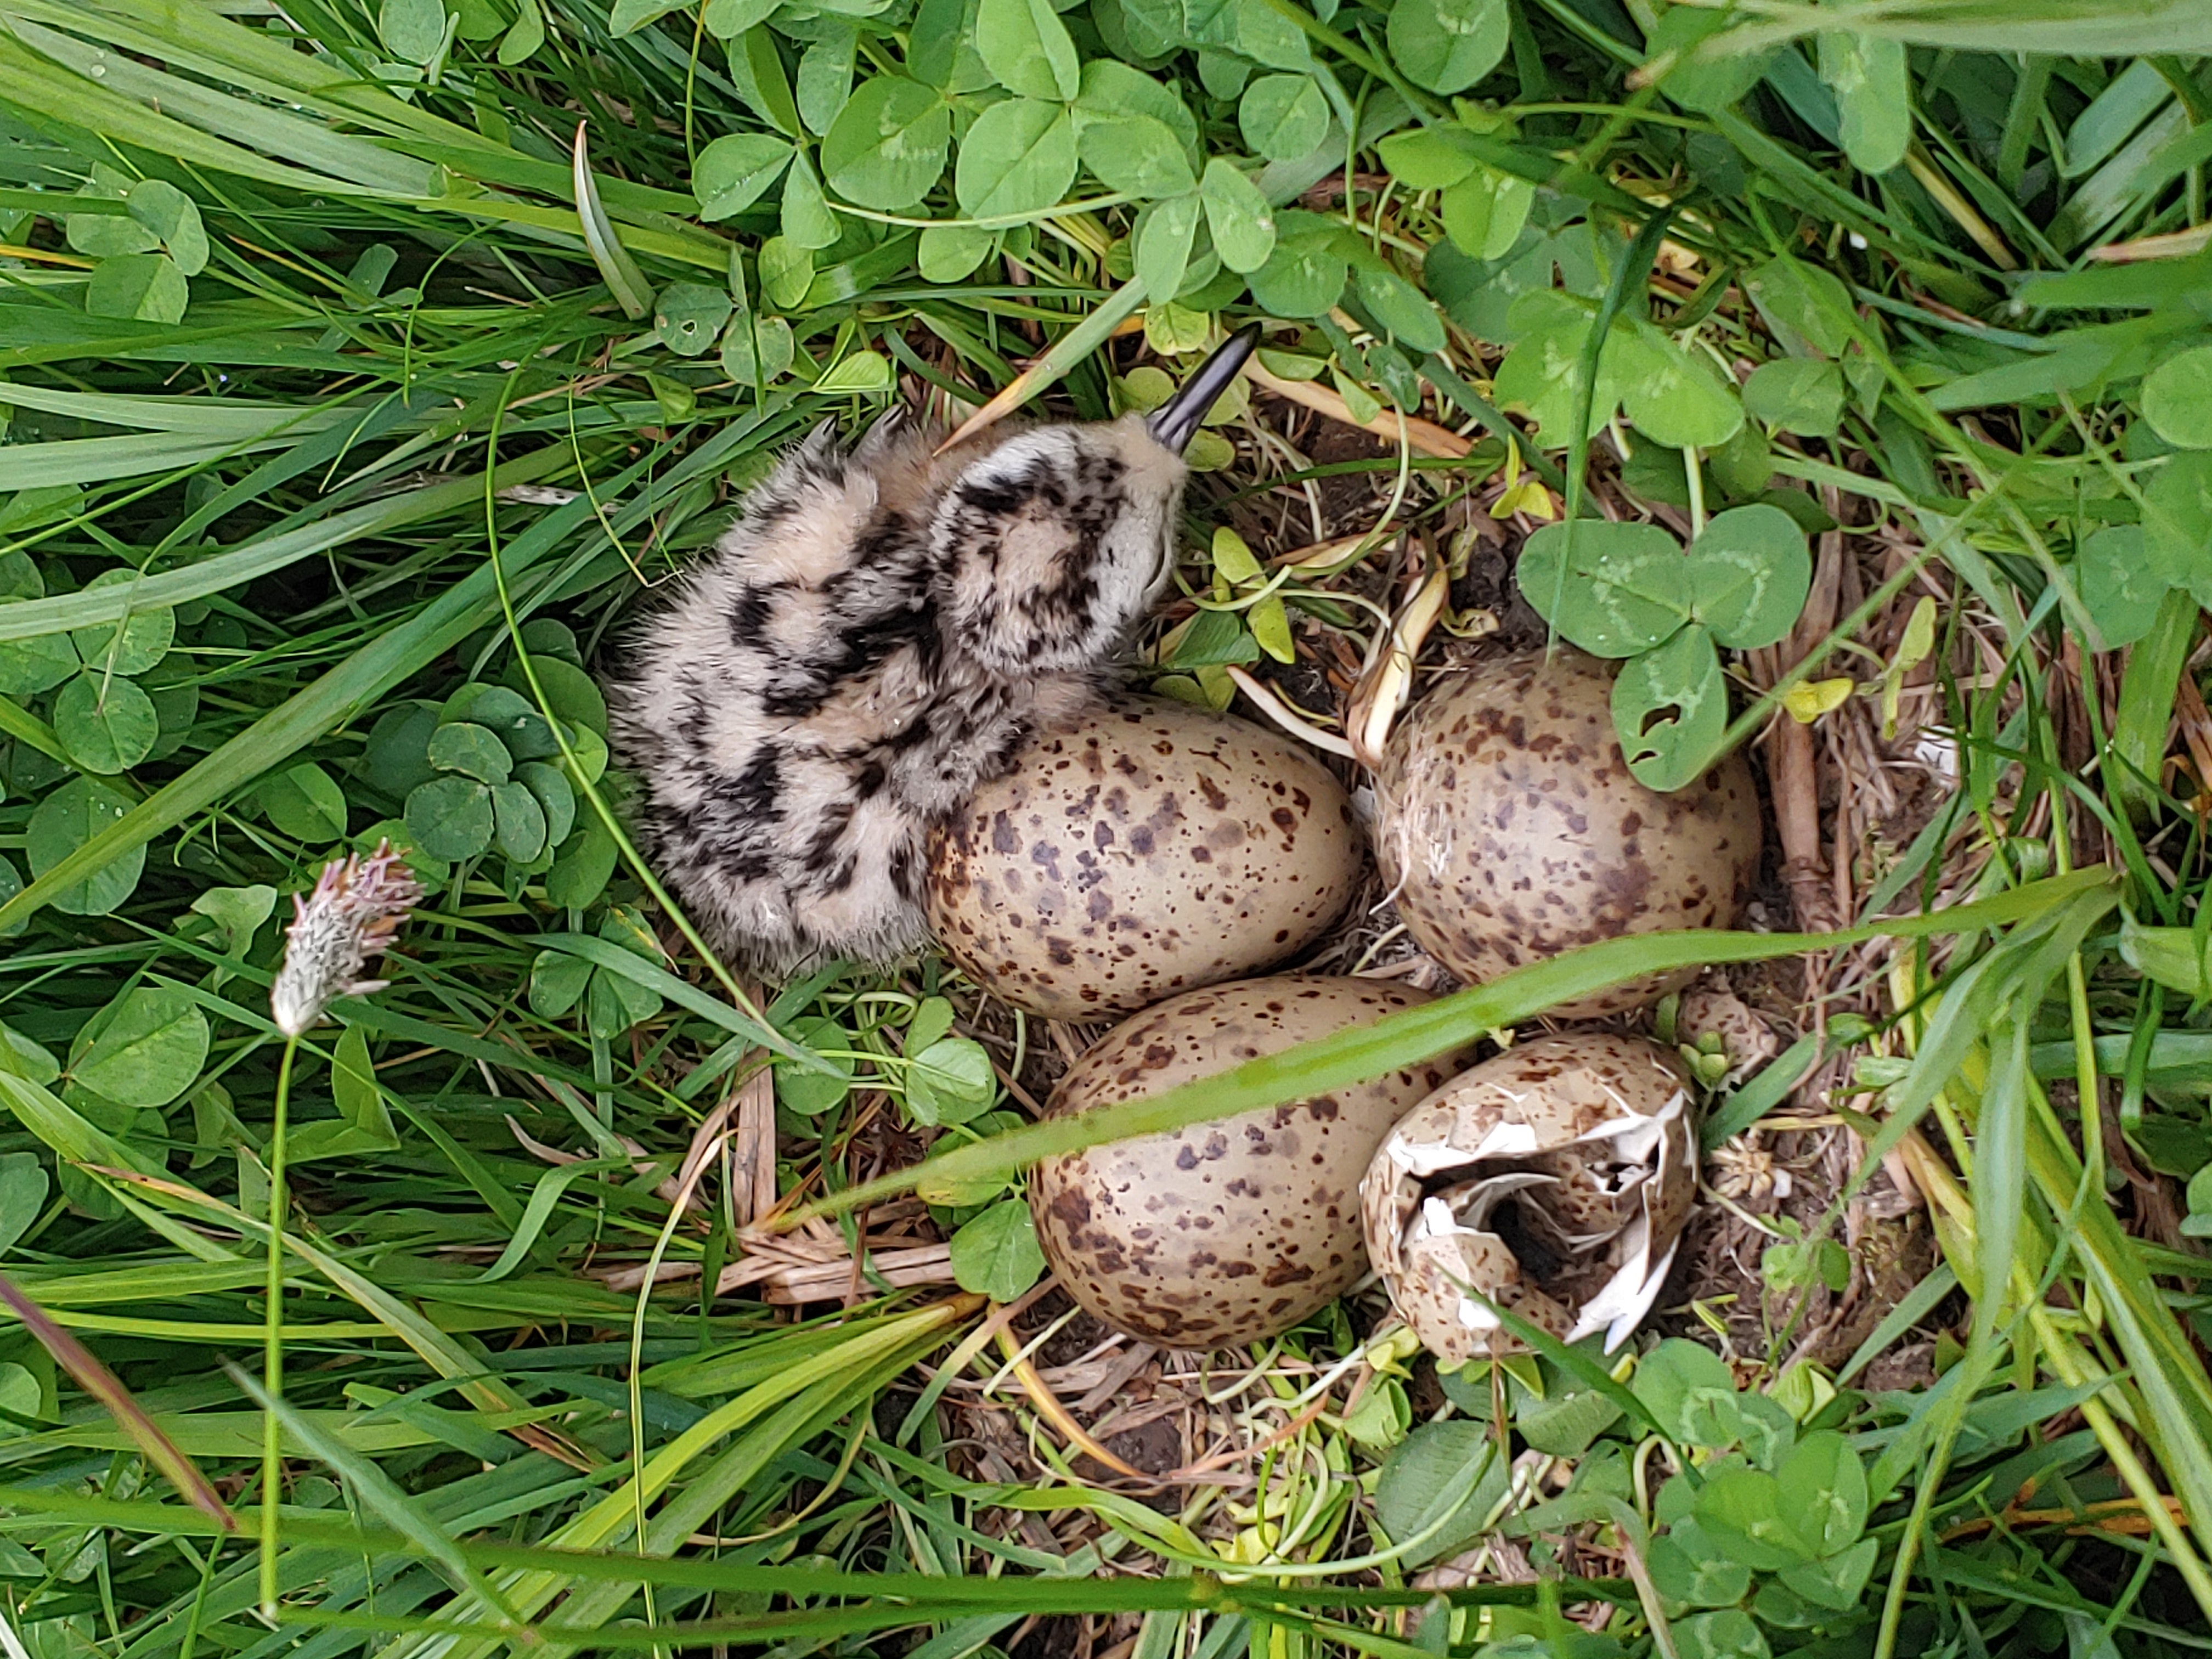 image shows small brown and white baby bird in a ground nest along side 3 unhatched green speckled eggs and an empty egg shell camofluaged in green grass